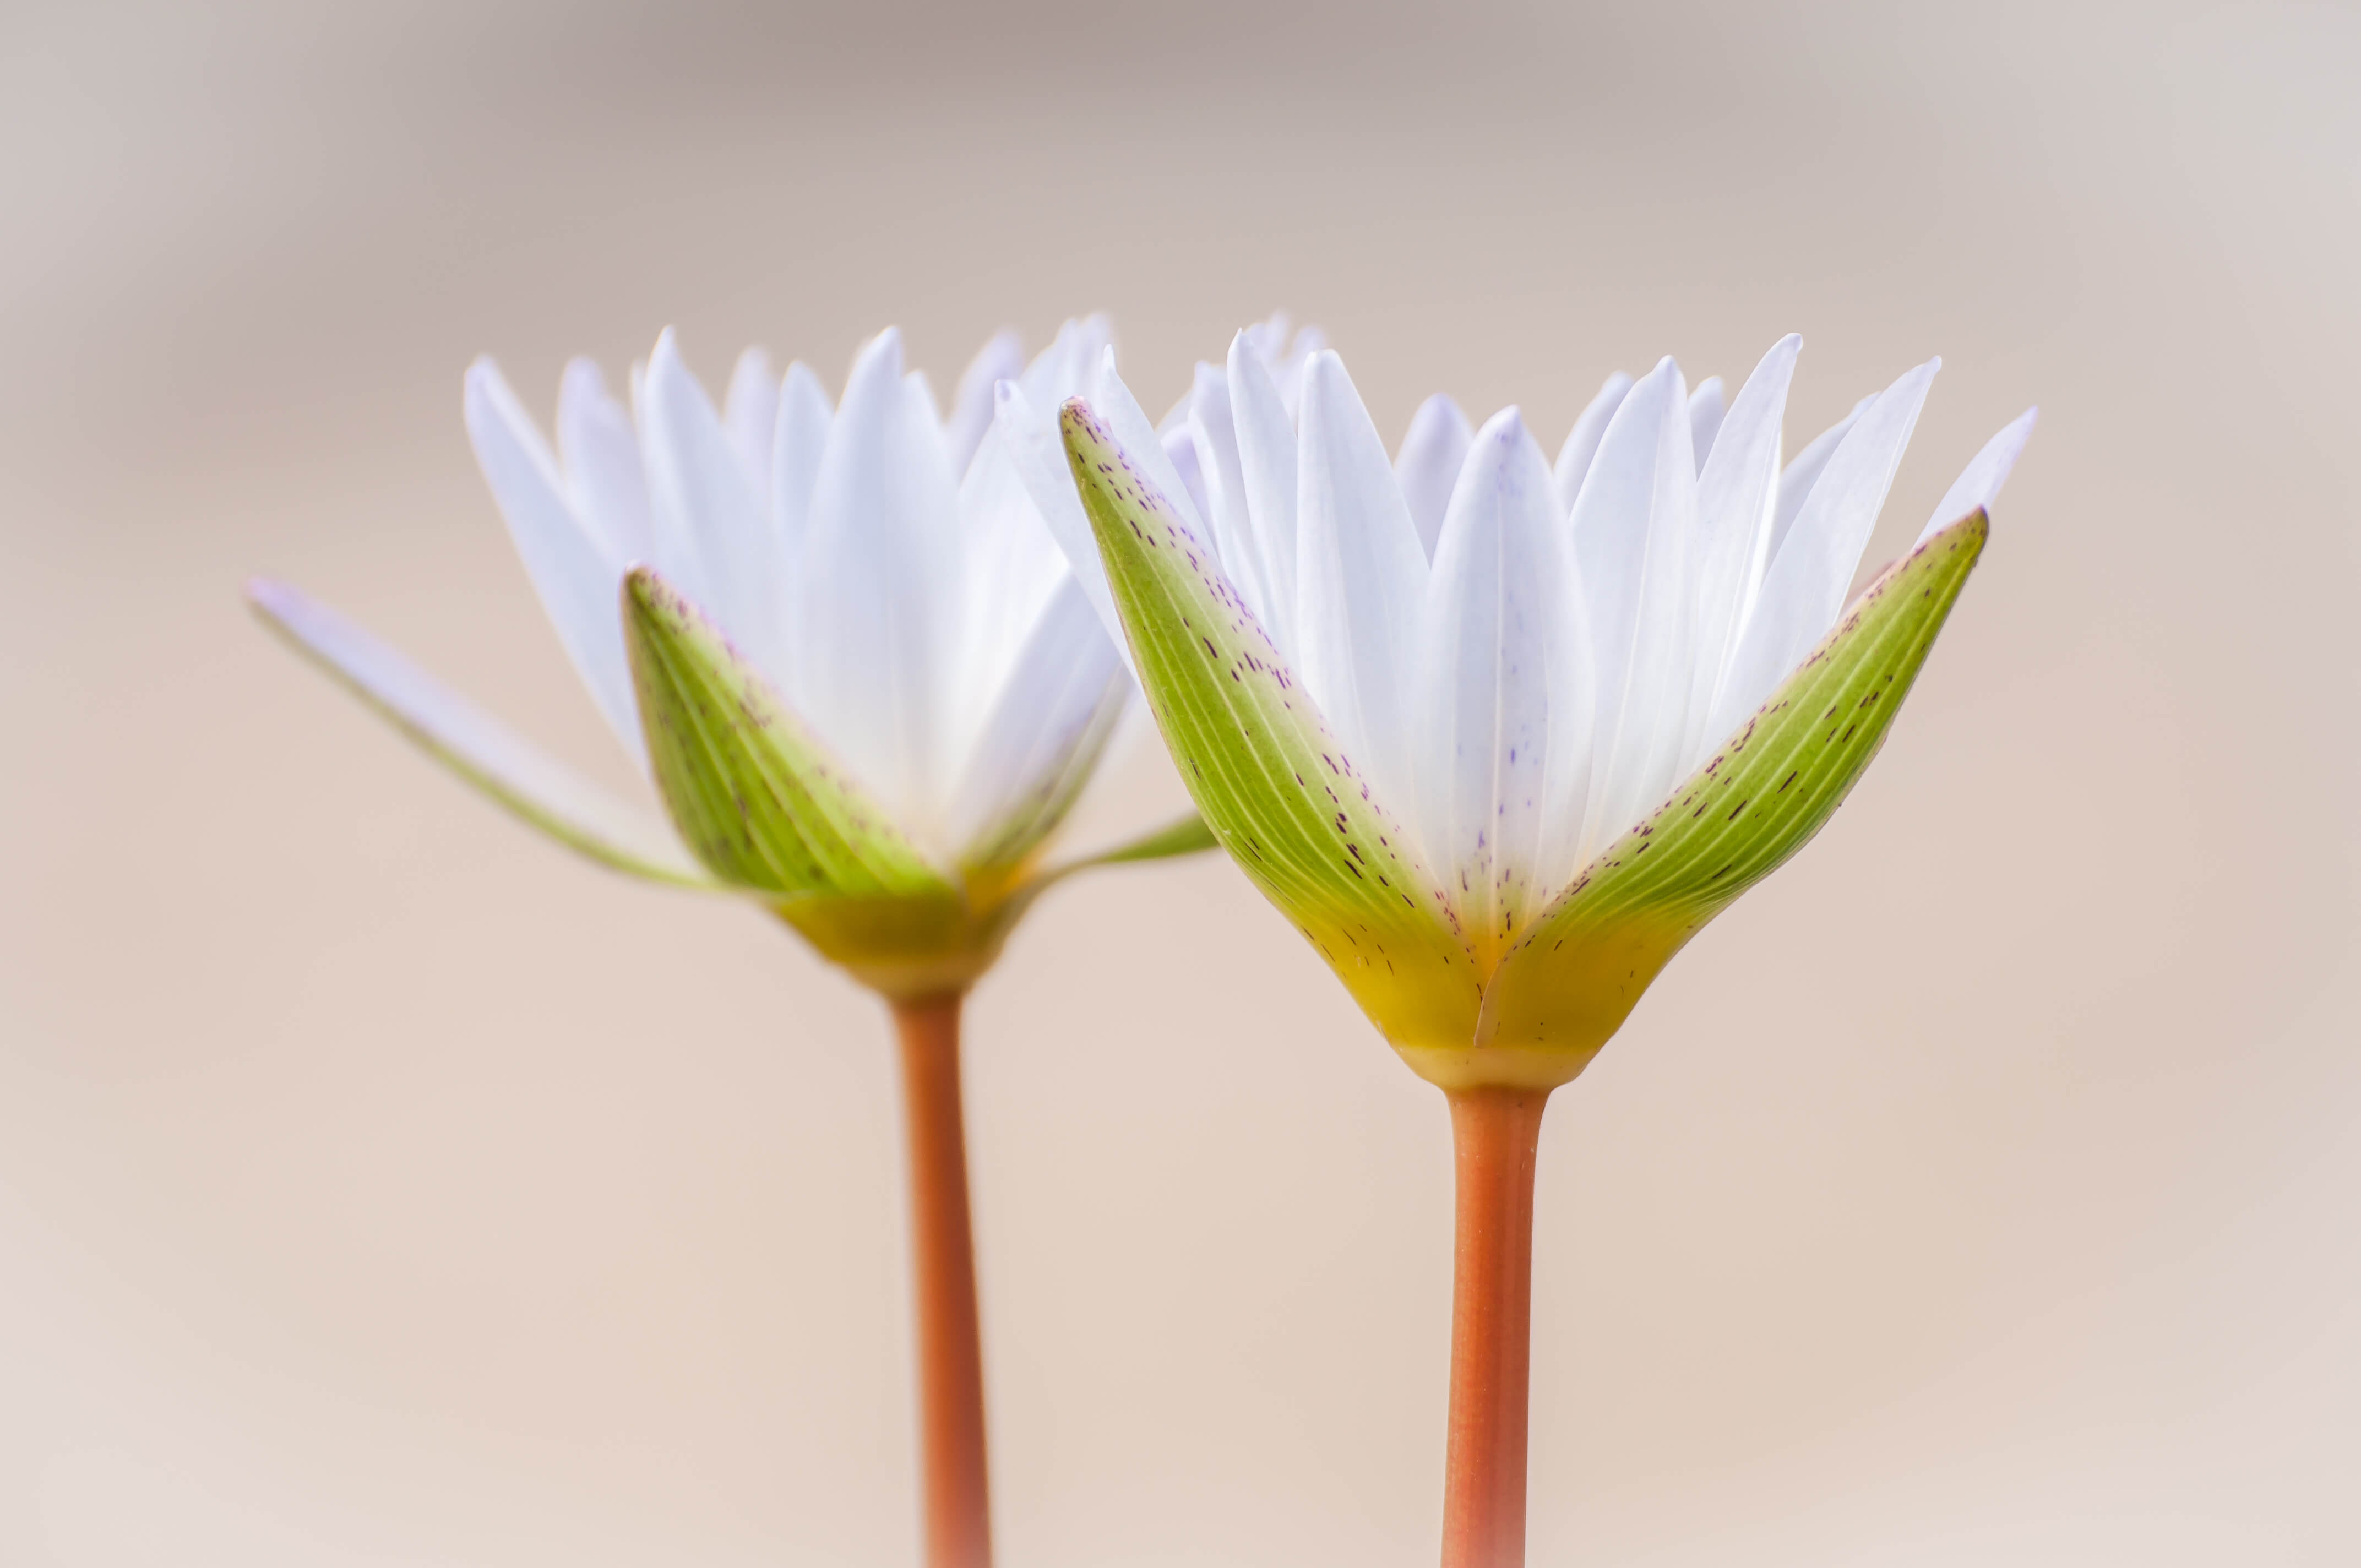 Image of two white lilies standing together like twins